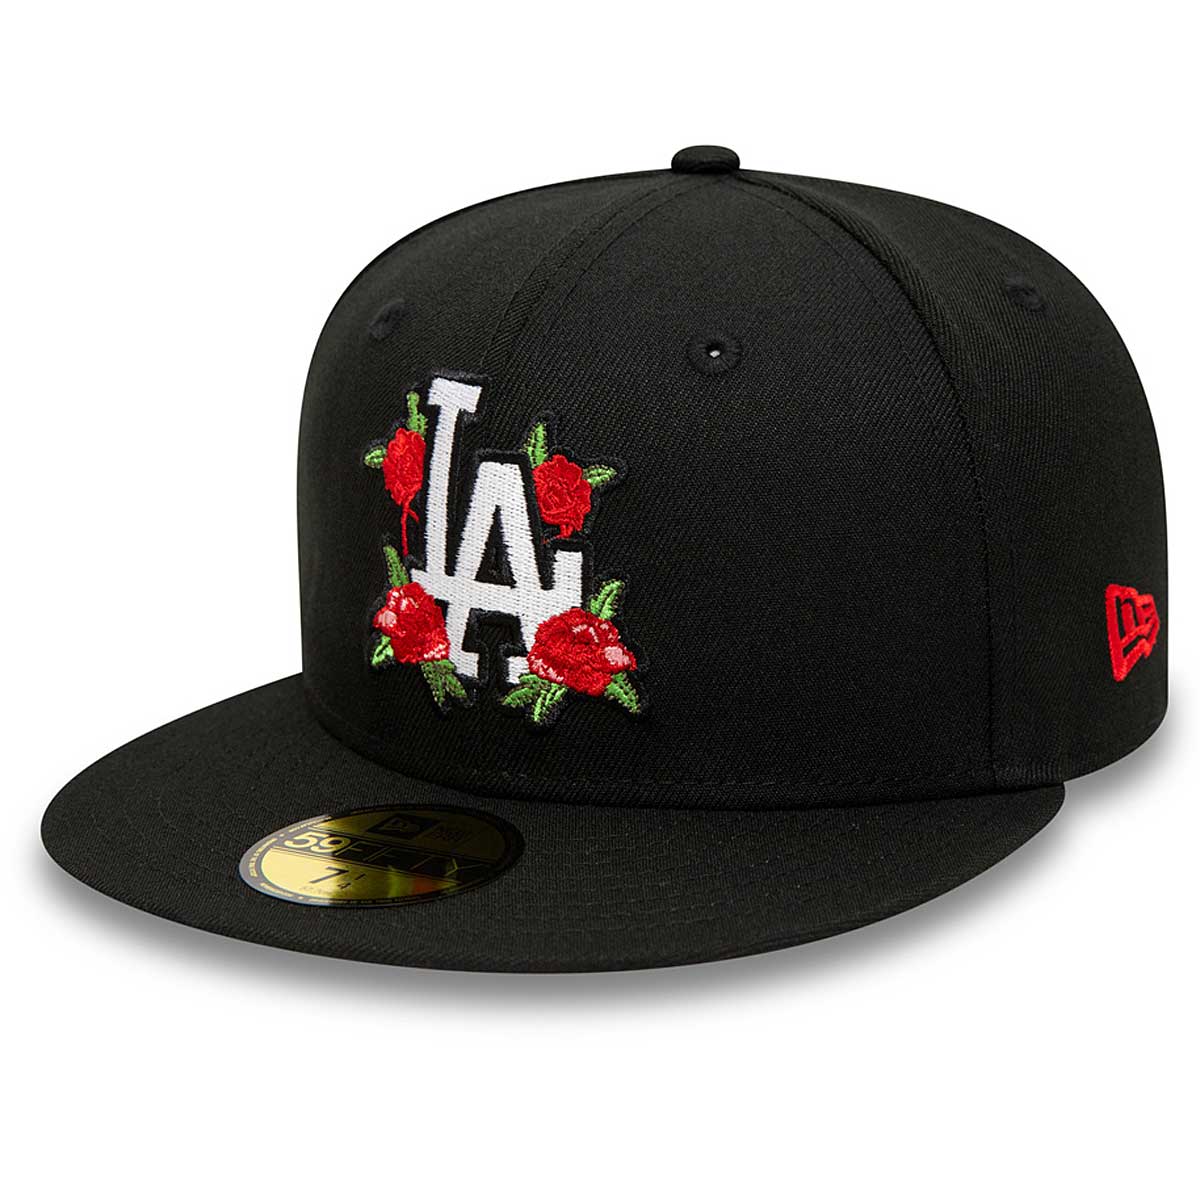 MLB Floral Baseball Hat  Urban Outfitters